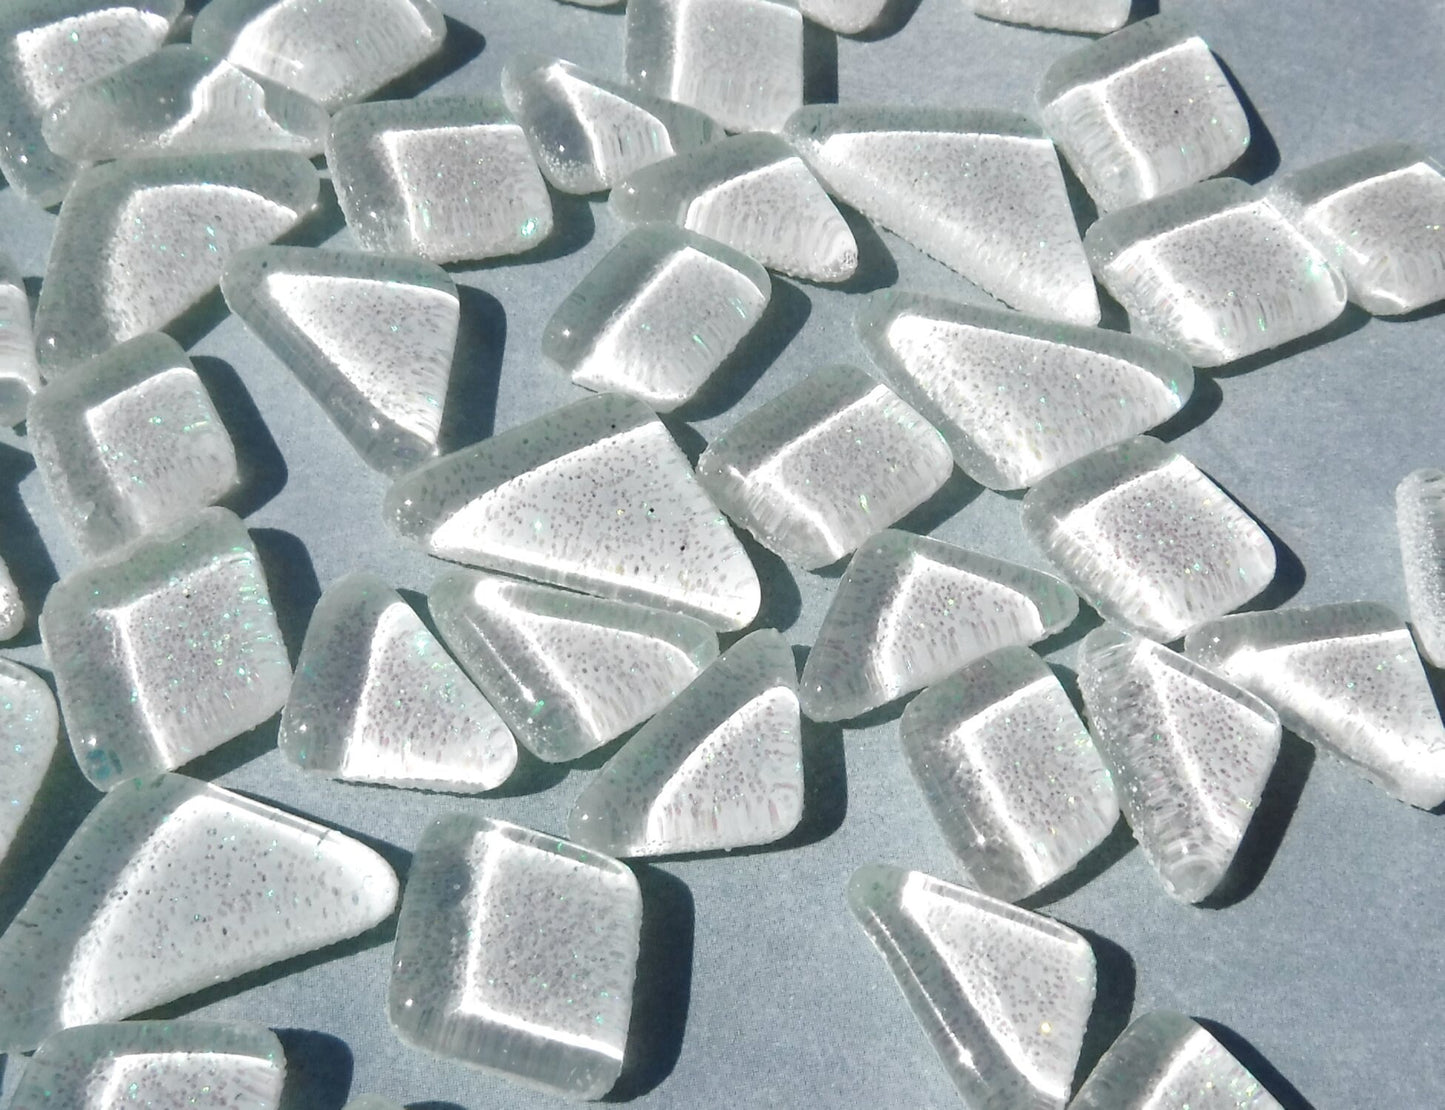 White Glitter Puzzle Tiles - 100 grams in Assorted Shapes Glass Mosaic Tiles - - Snow Icicle